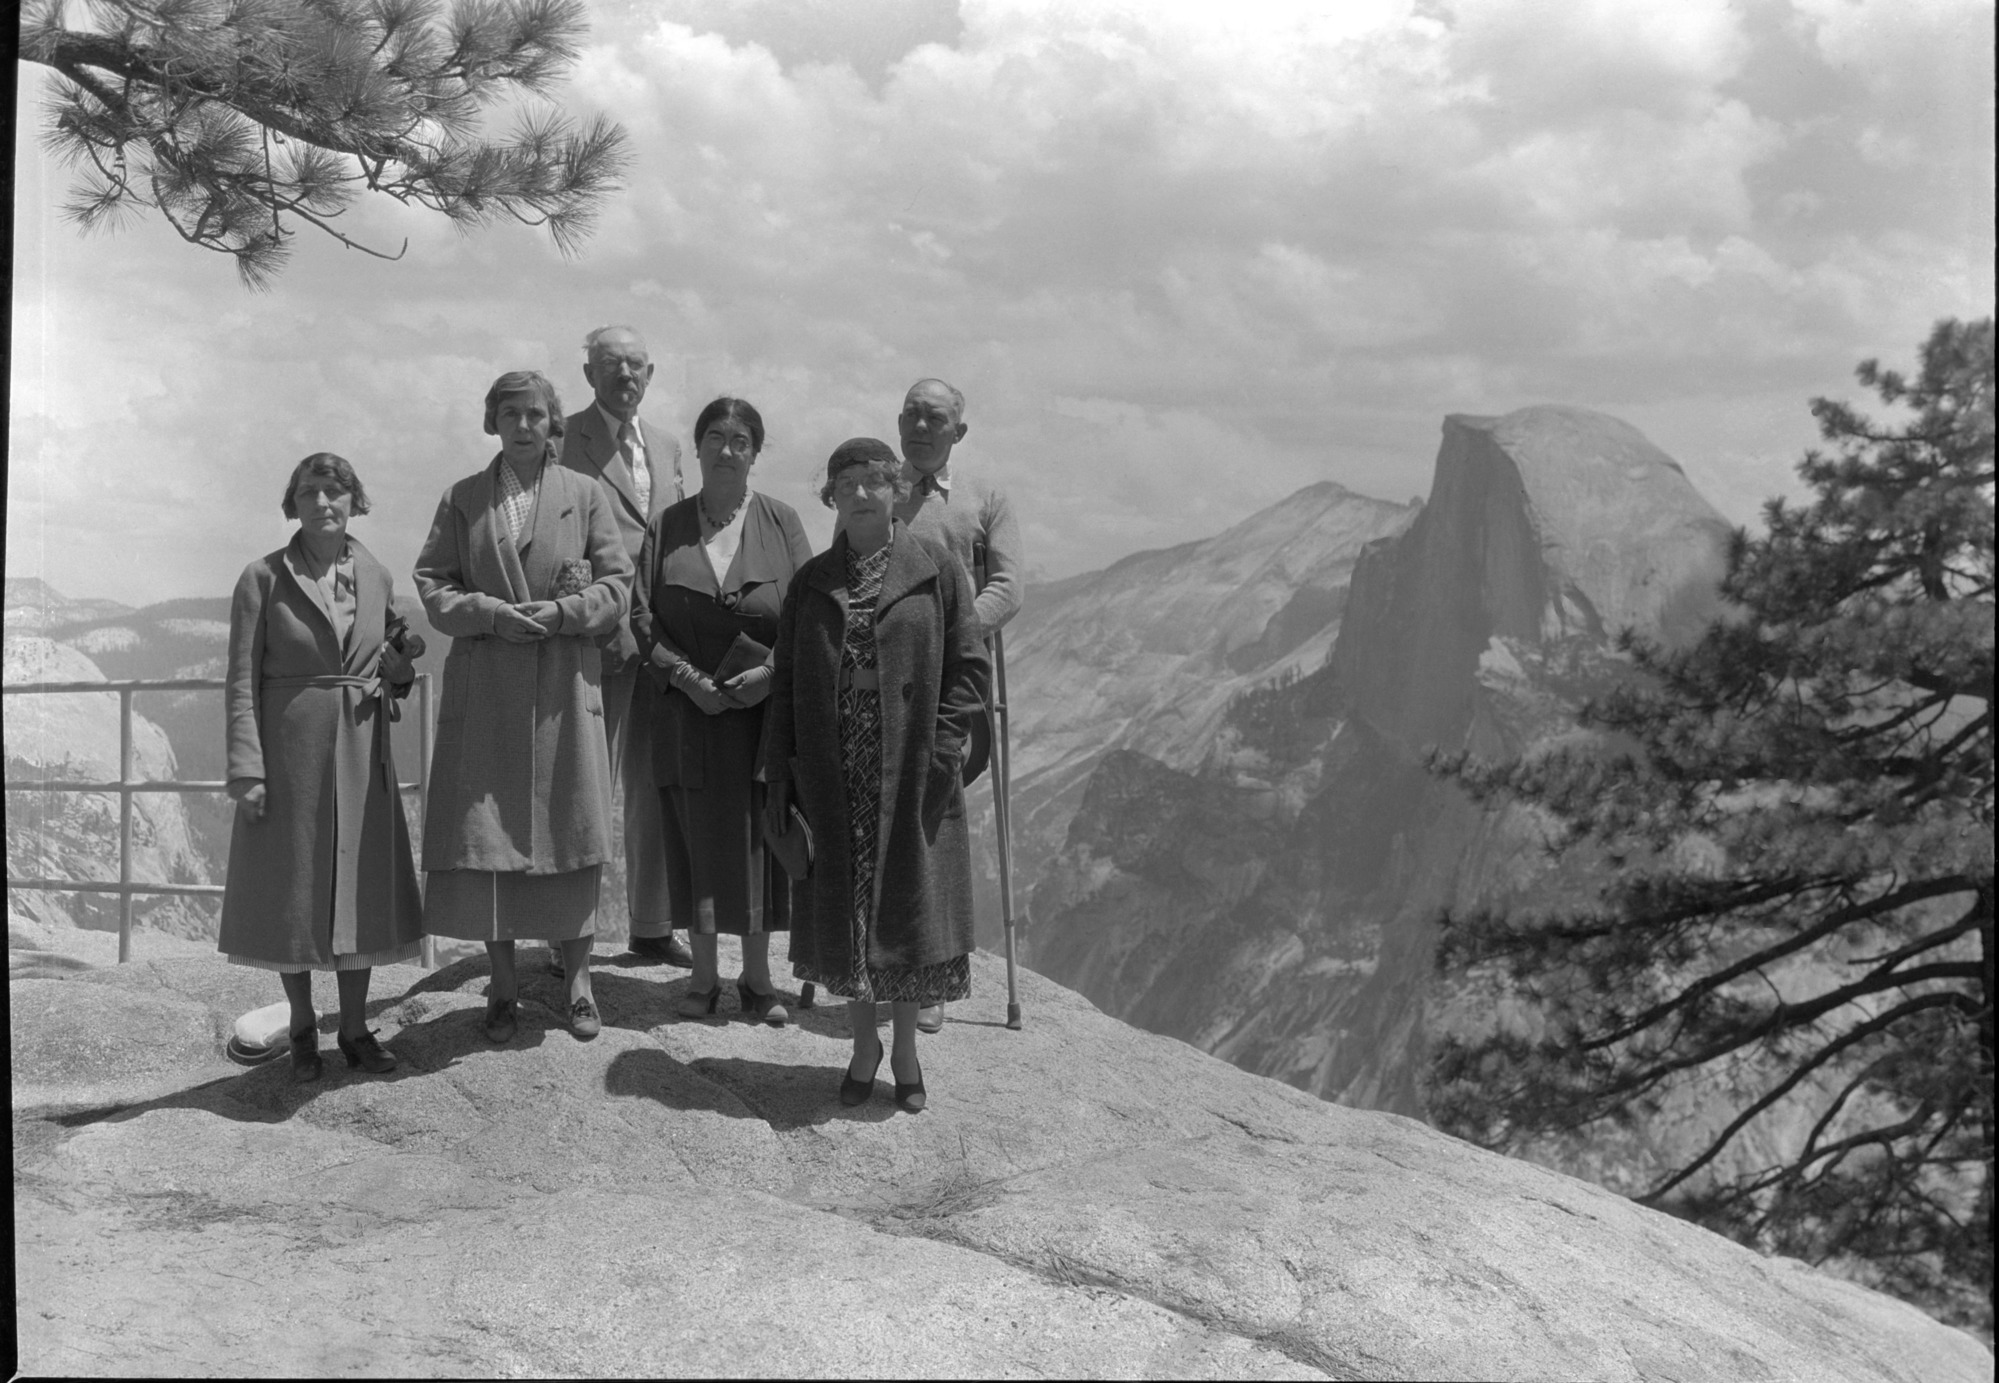 American Legion Auxilliary party at Glacier Point. L to R: Mrs. Butts, Yosemit; Mrs. Sutherland, Yosemitel Colonel Chas W. Decker; Los Angeles; Mrs. Chas. Decker, Pres. Aux. 1923; Mrs. Milo D. Aylward, Pres. 1934; Milo D. Aylward, 616 Charter Oak St; South Pasadena, CA.